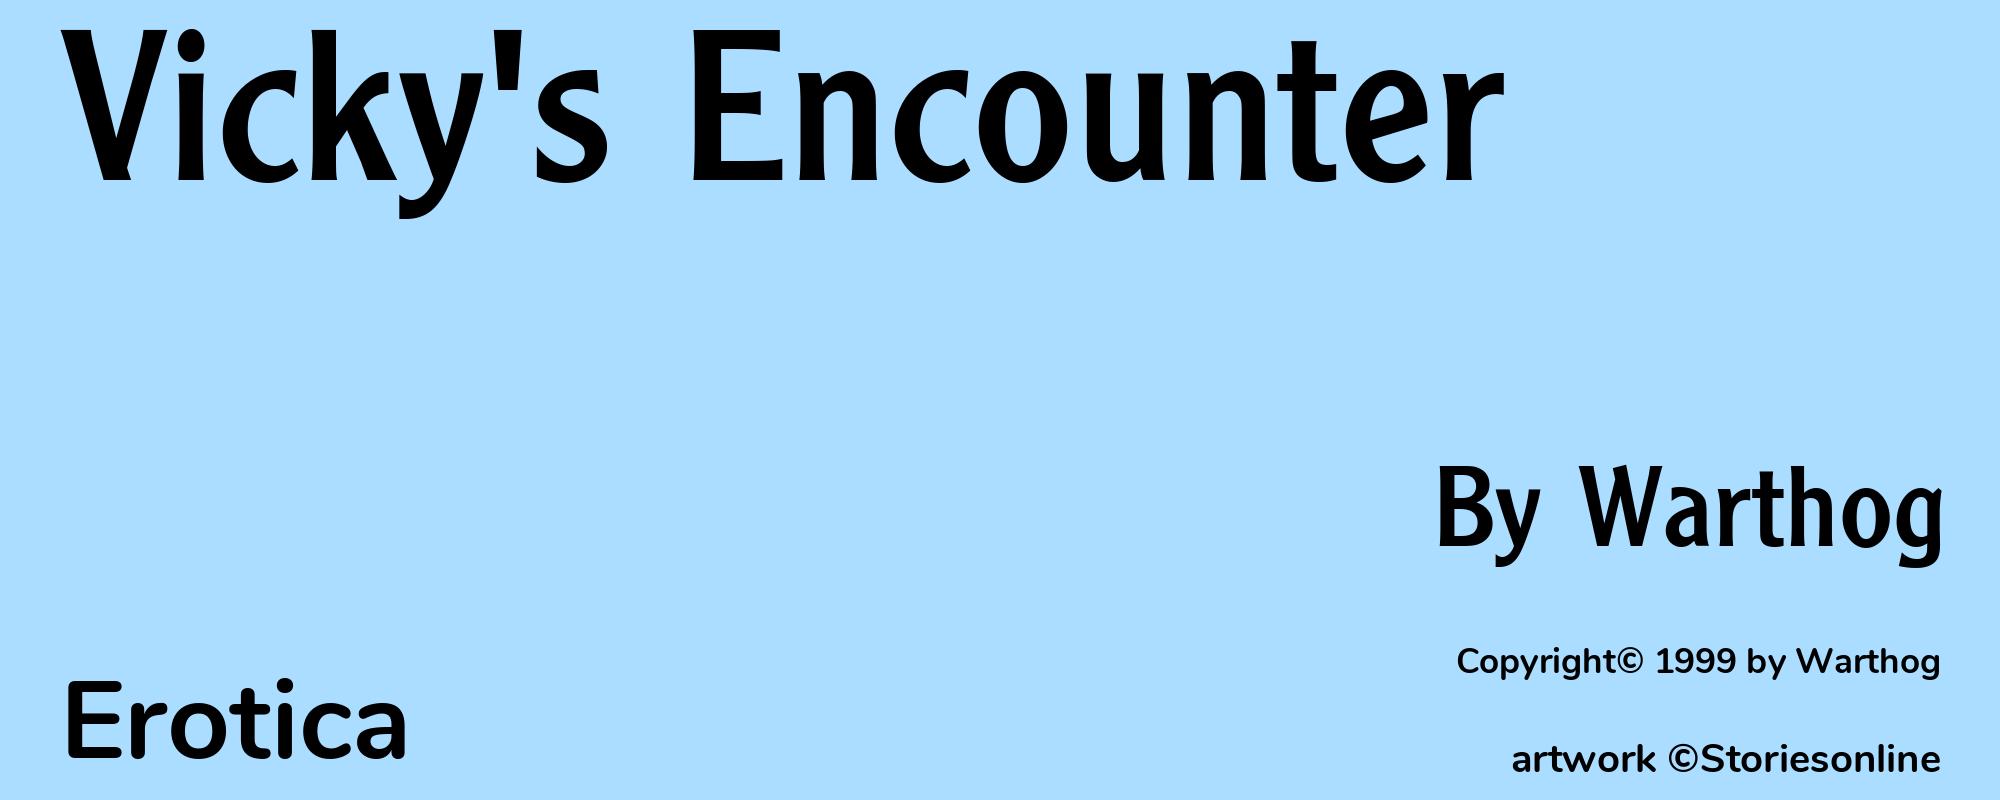 Vicky's Encounter - Cover